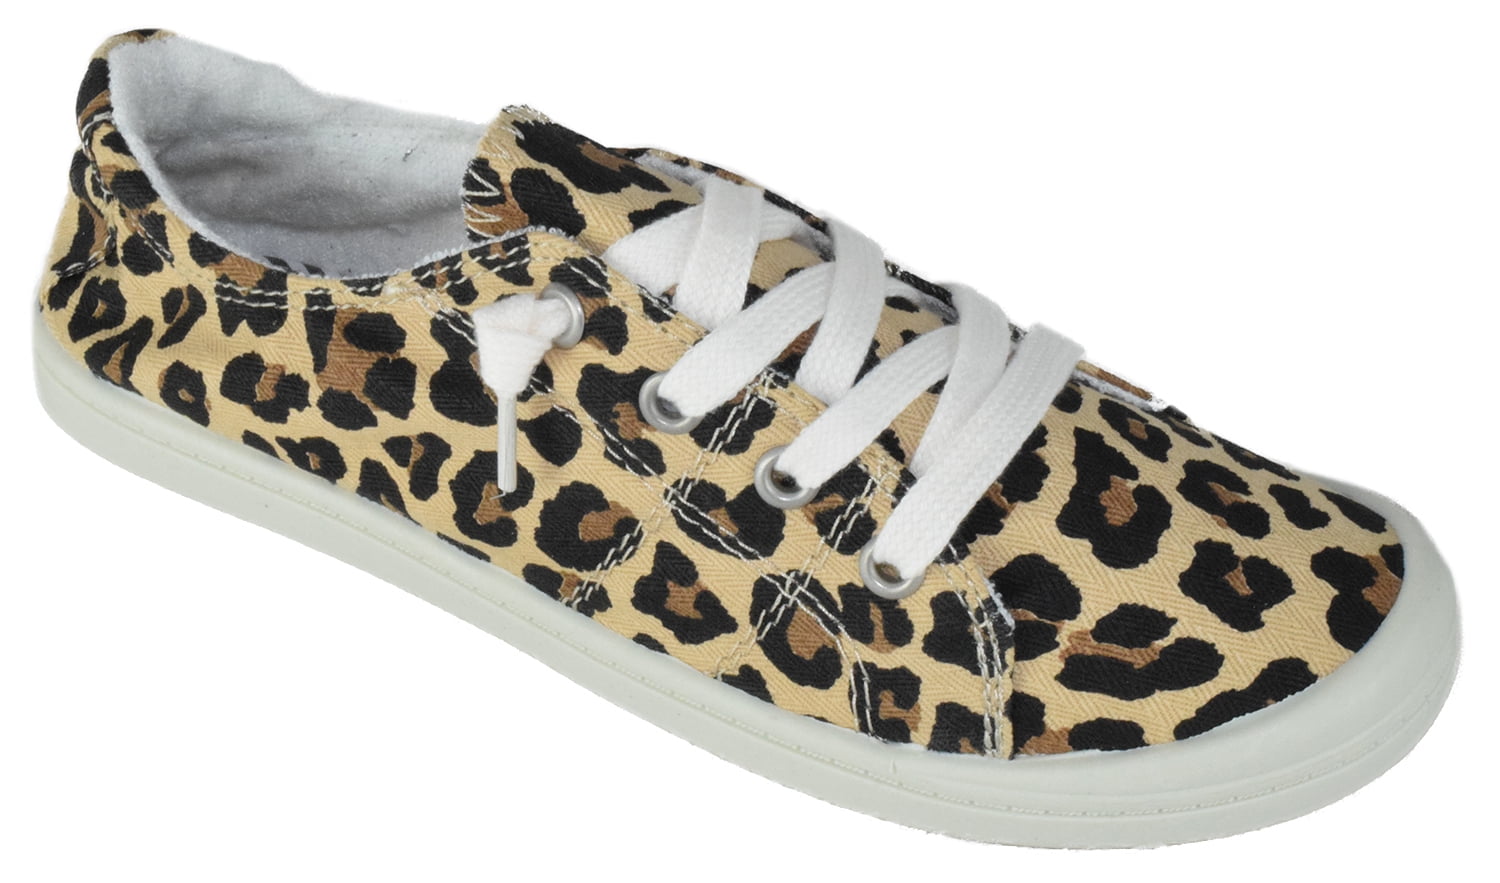 WOMENS LADIES LACE UP SIDE ANIMAL PRINT TRAINERS SNEAKERS PLIMSOLLS WOMEN SHOES 